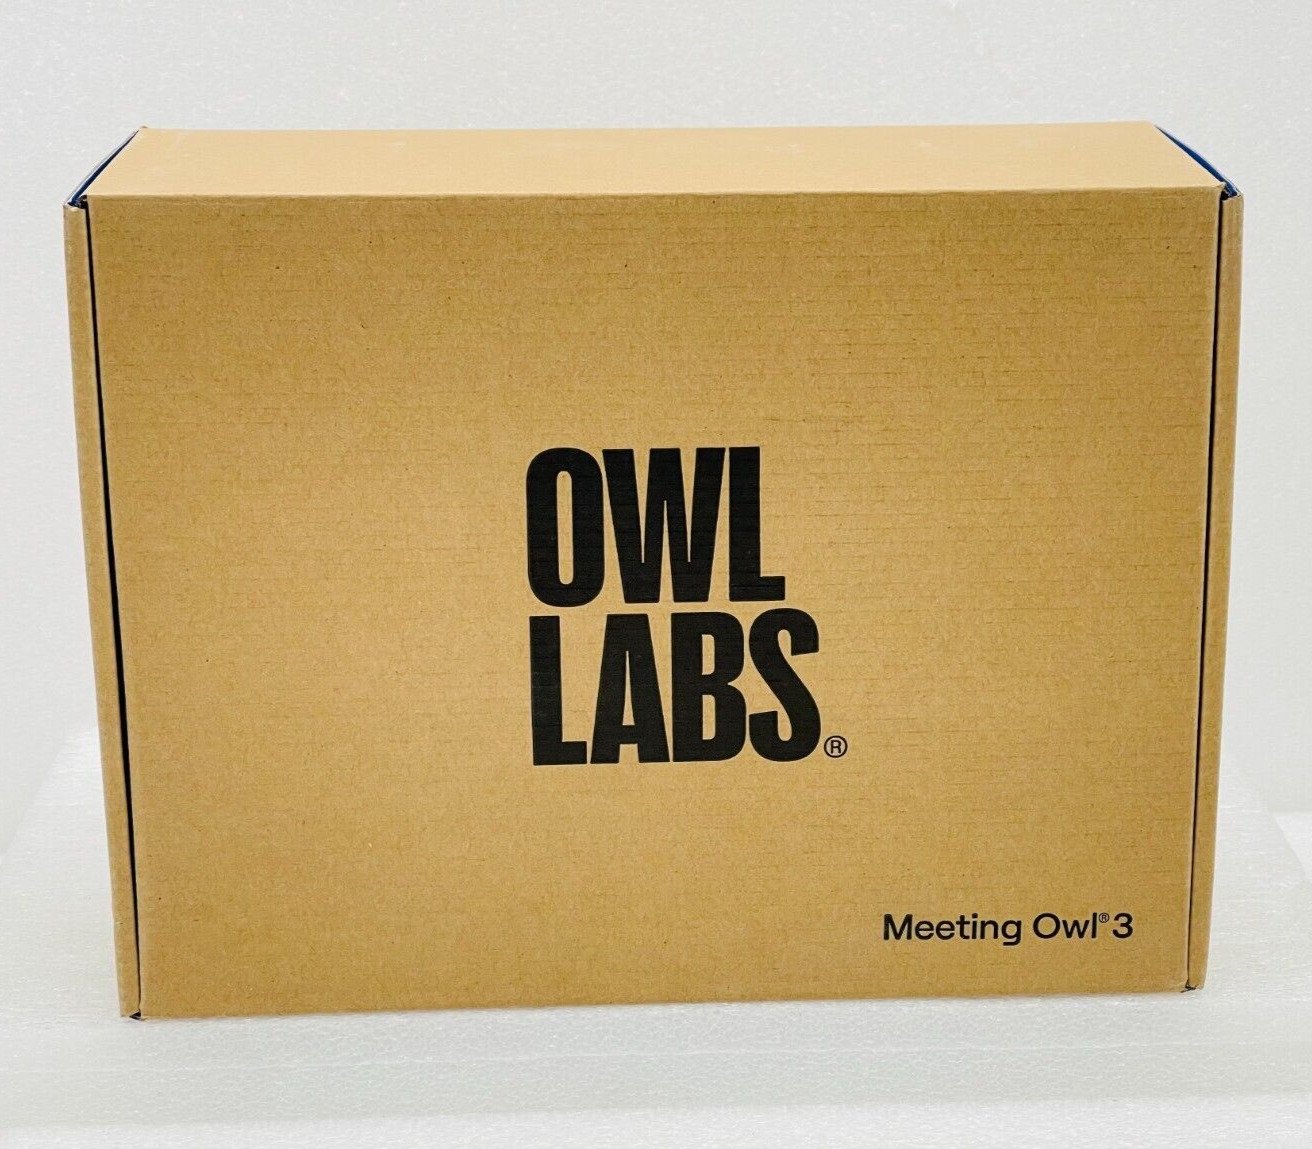 New (Sealed) Owl Labs Meeting Owl 3 360-Degree Video Conference Camera MTW300 